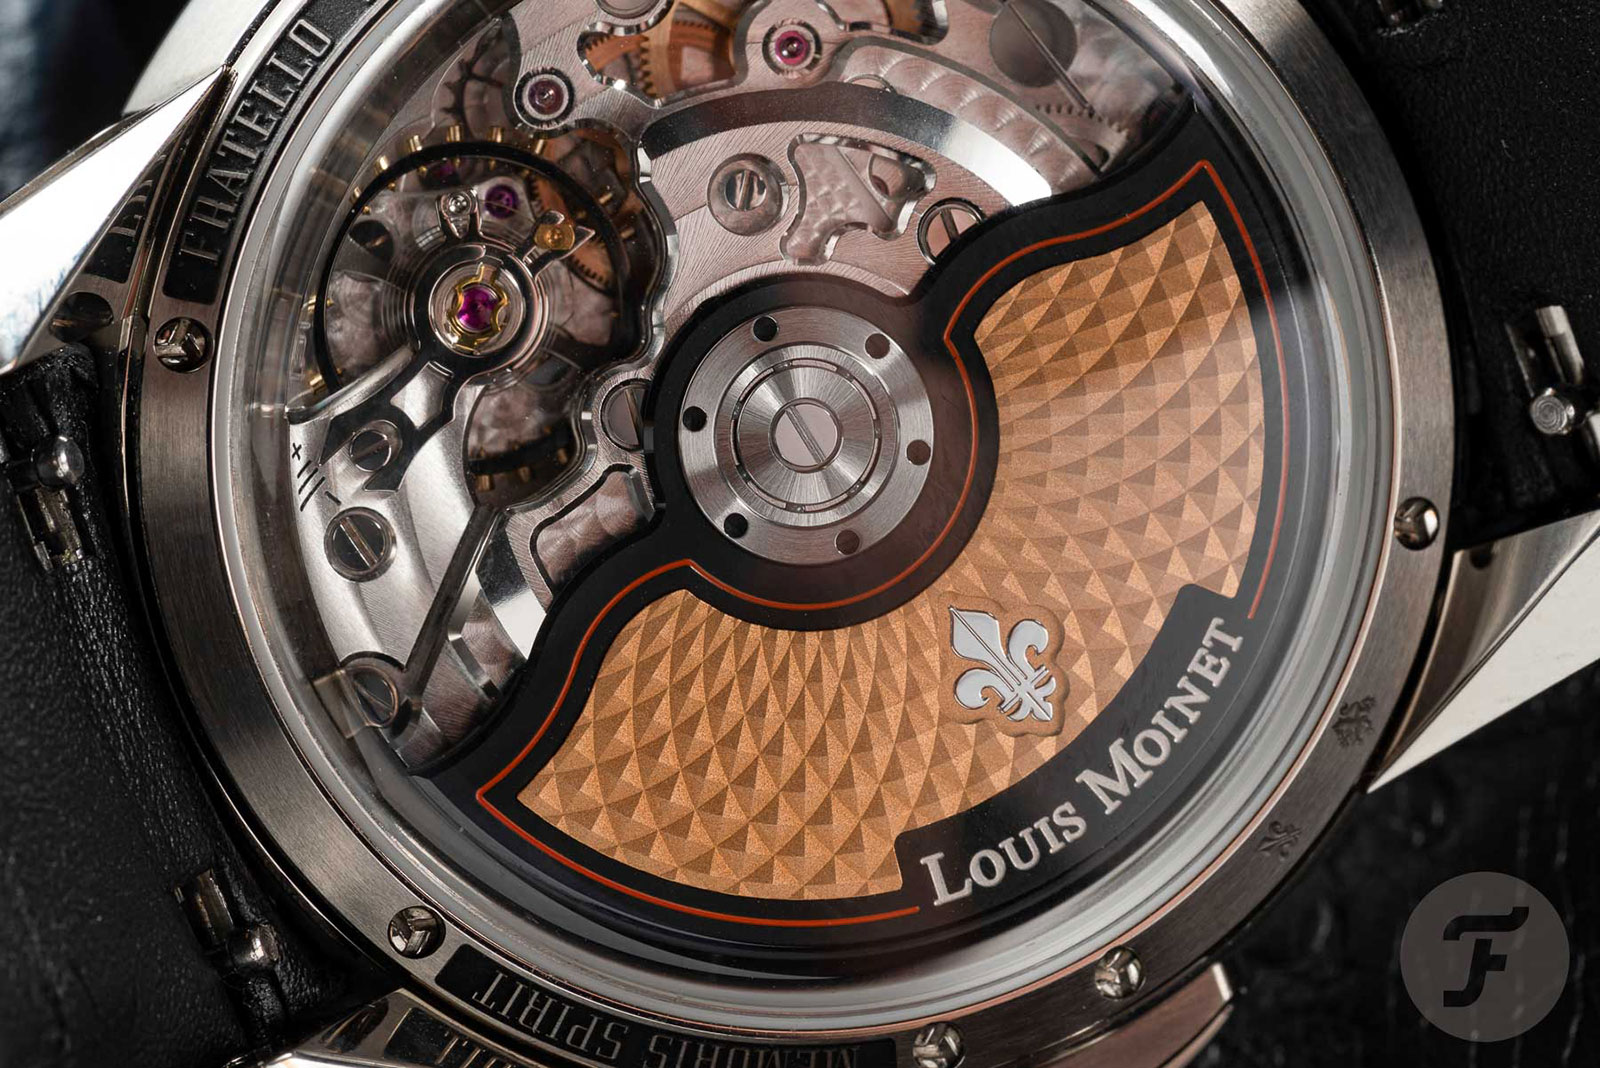 Louis Moinet – The genius behind the world's first chronograph